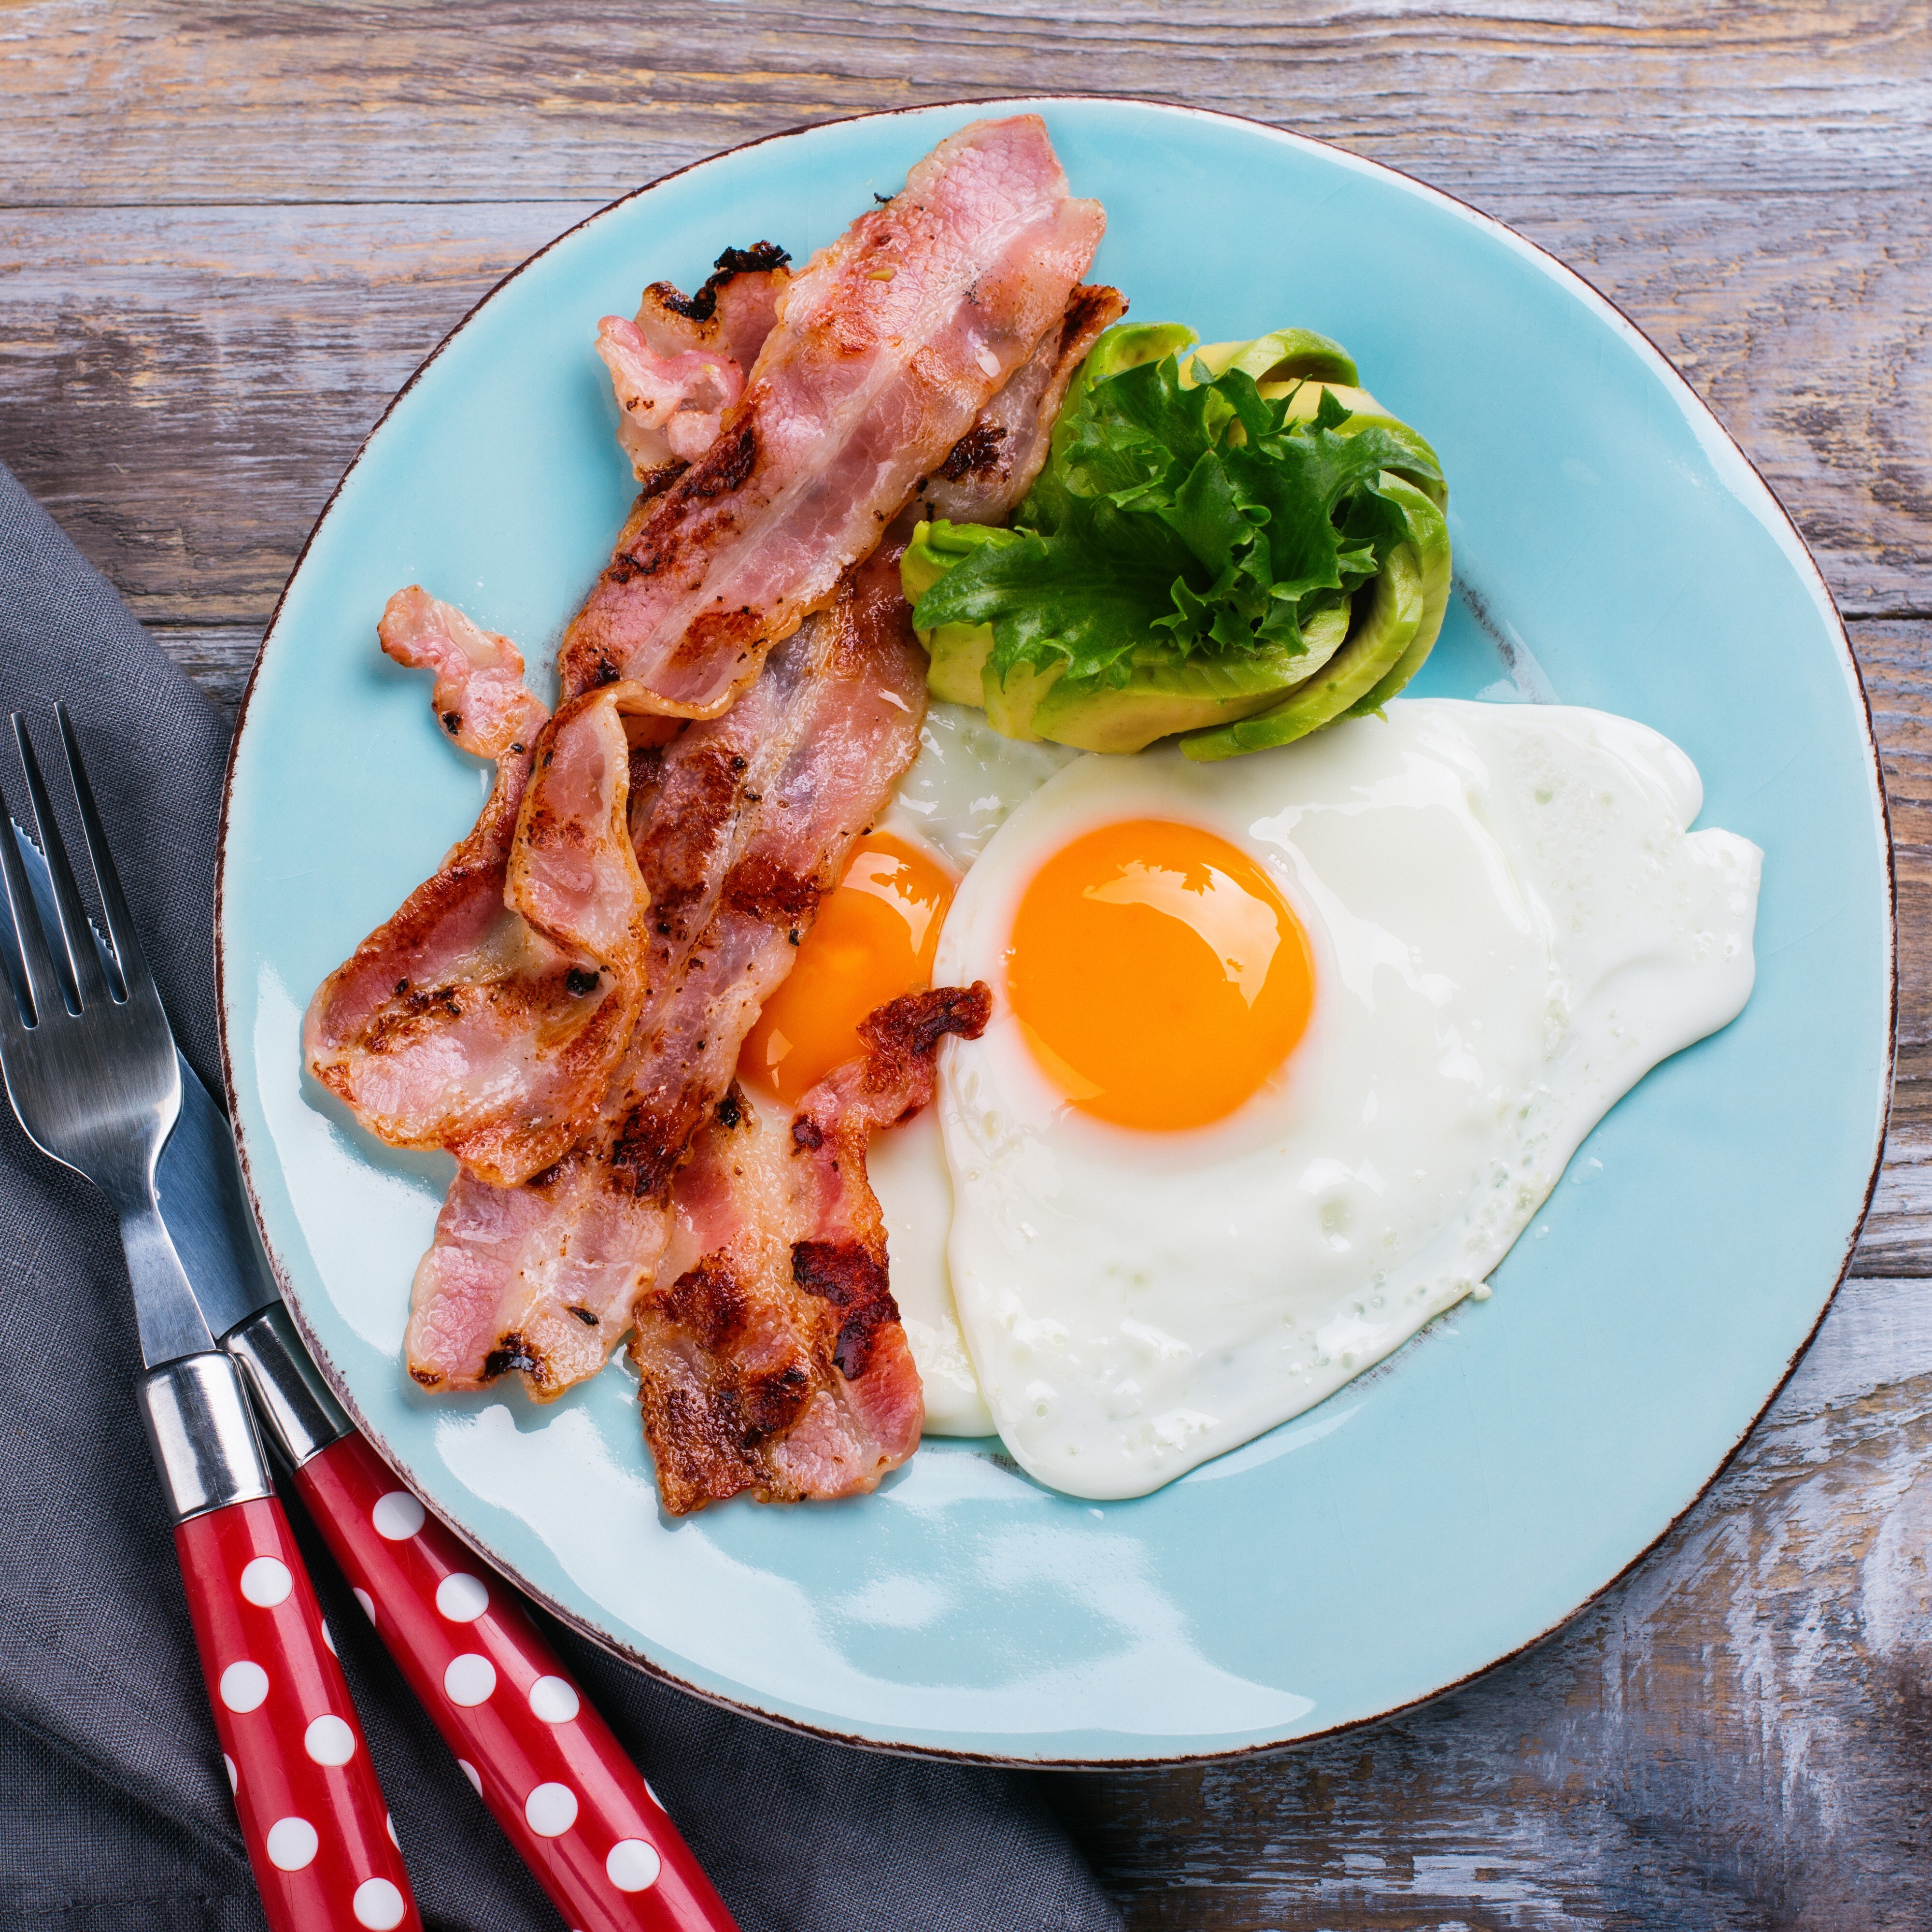 A breakfast of fried eggs, bacon and avocado fits the ketogenic diet. Photo: Shutterstock